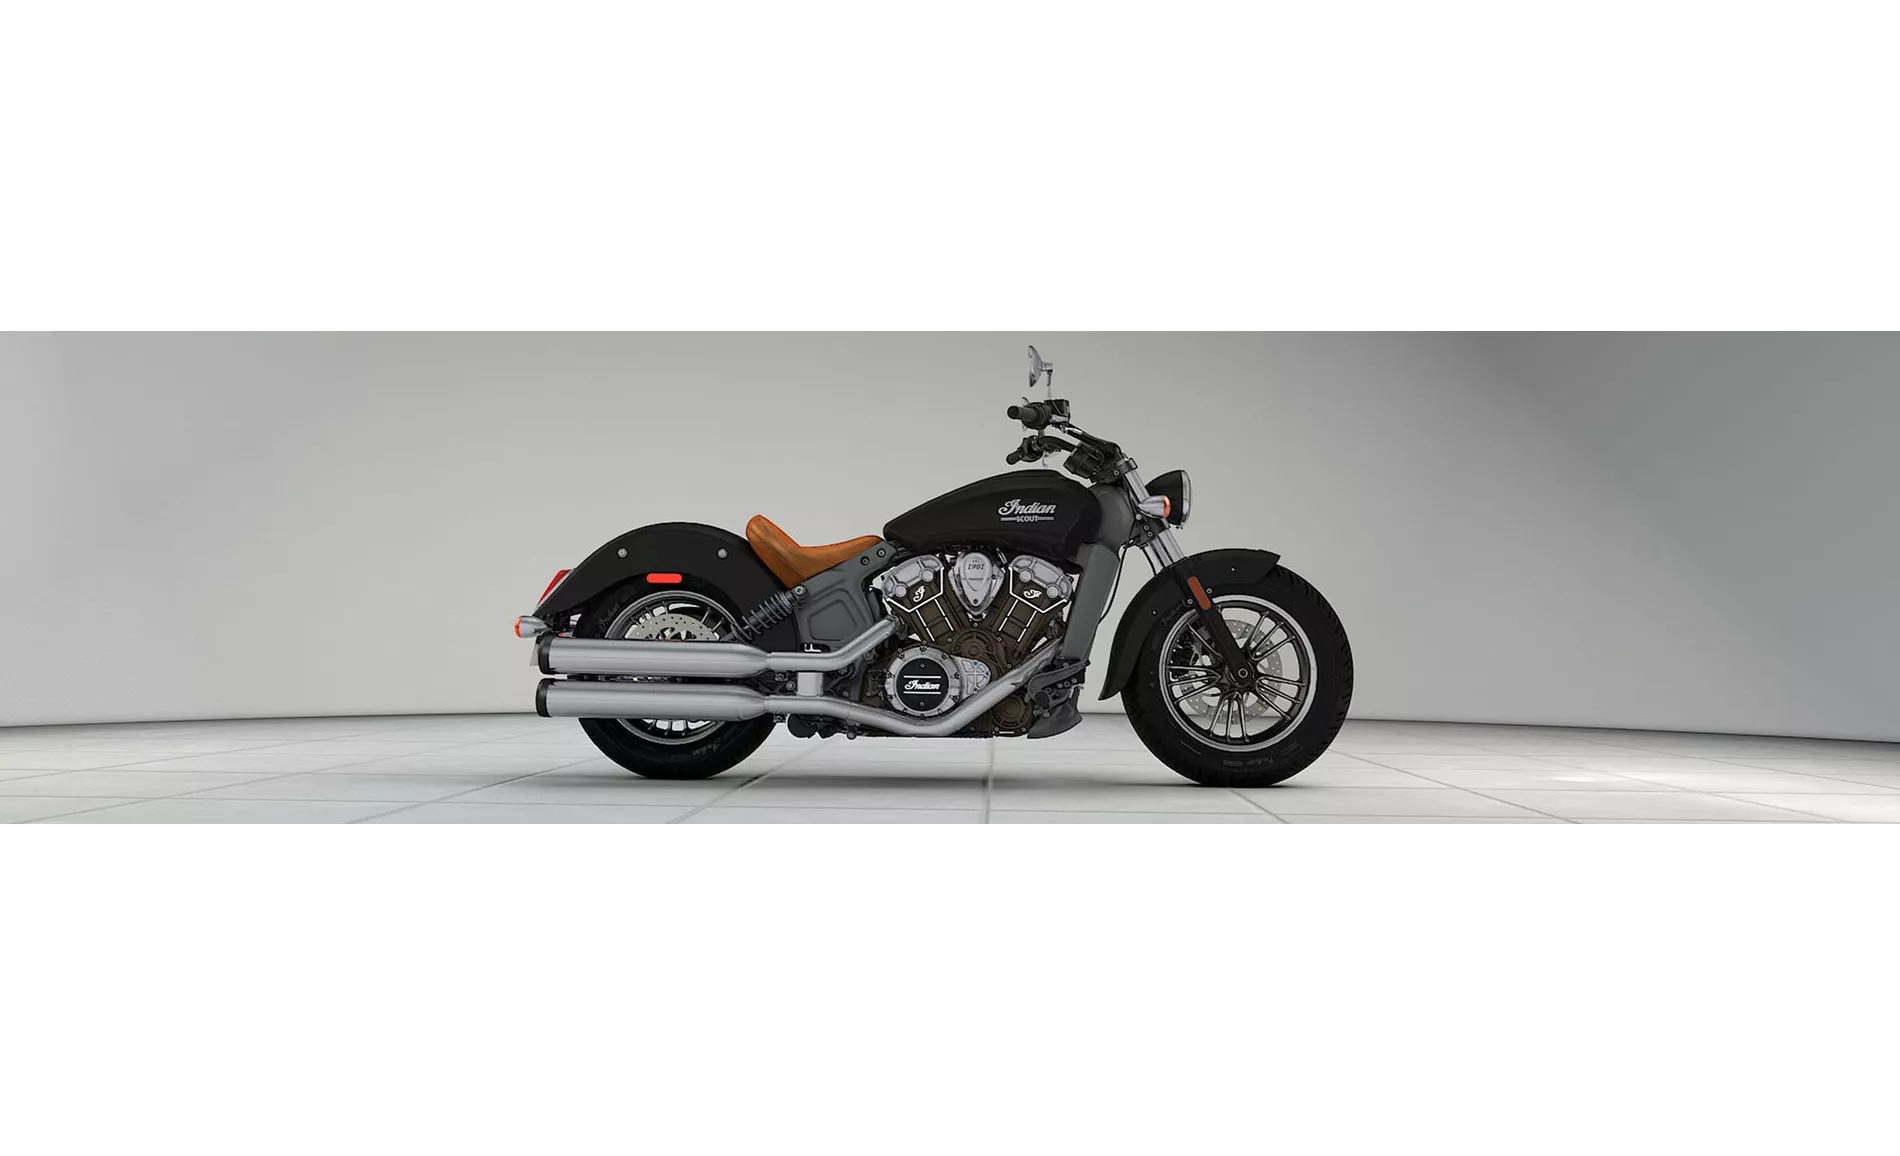 Indian Scout 2017